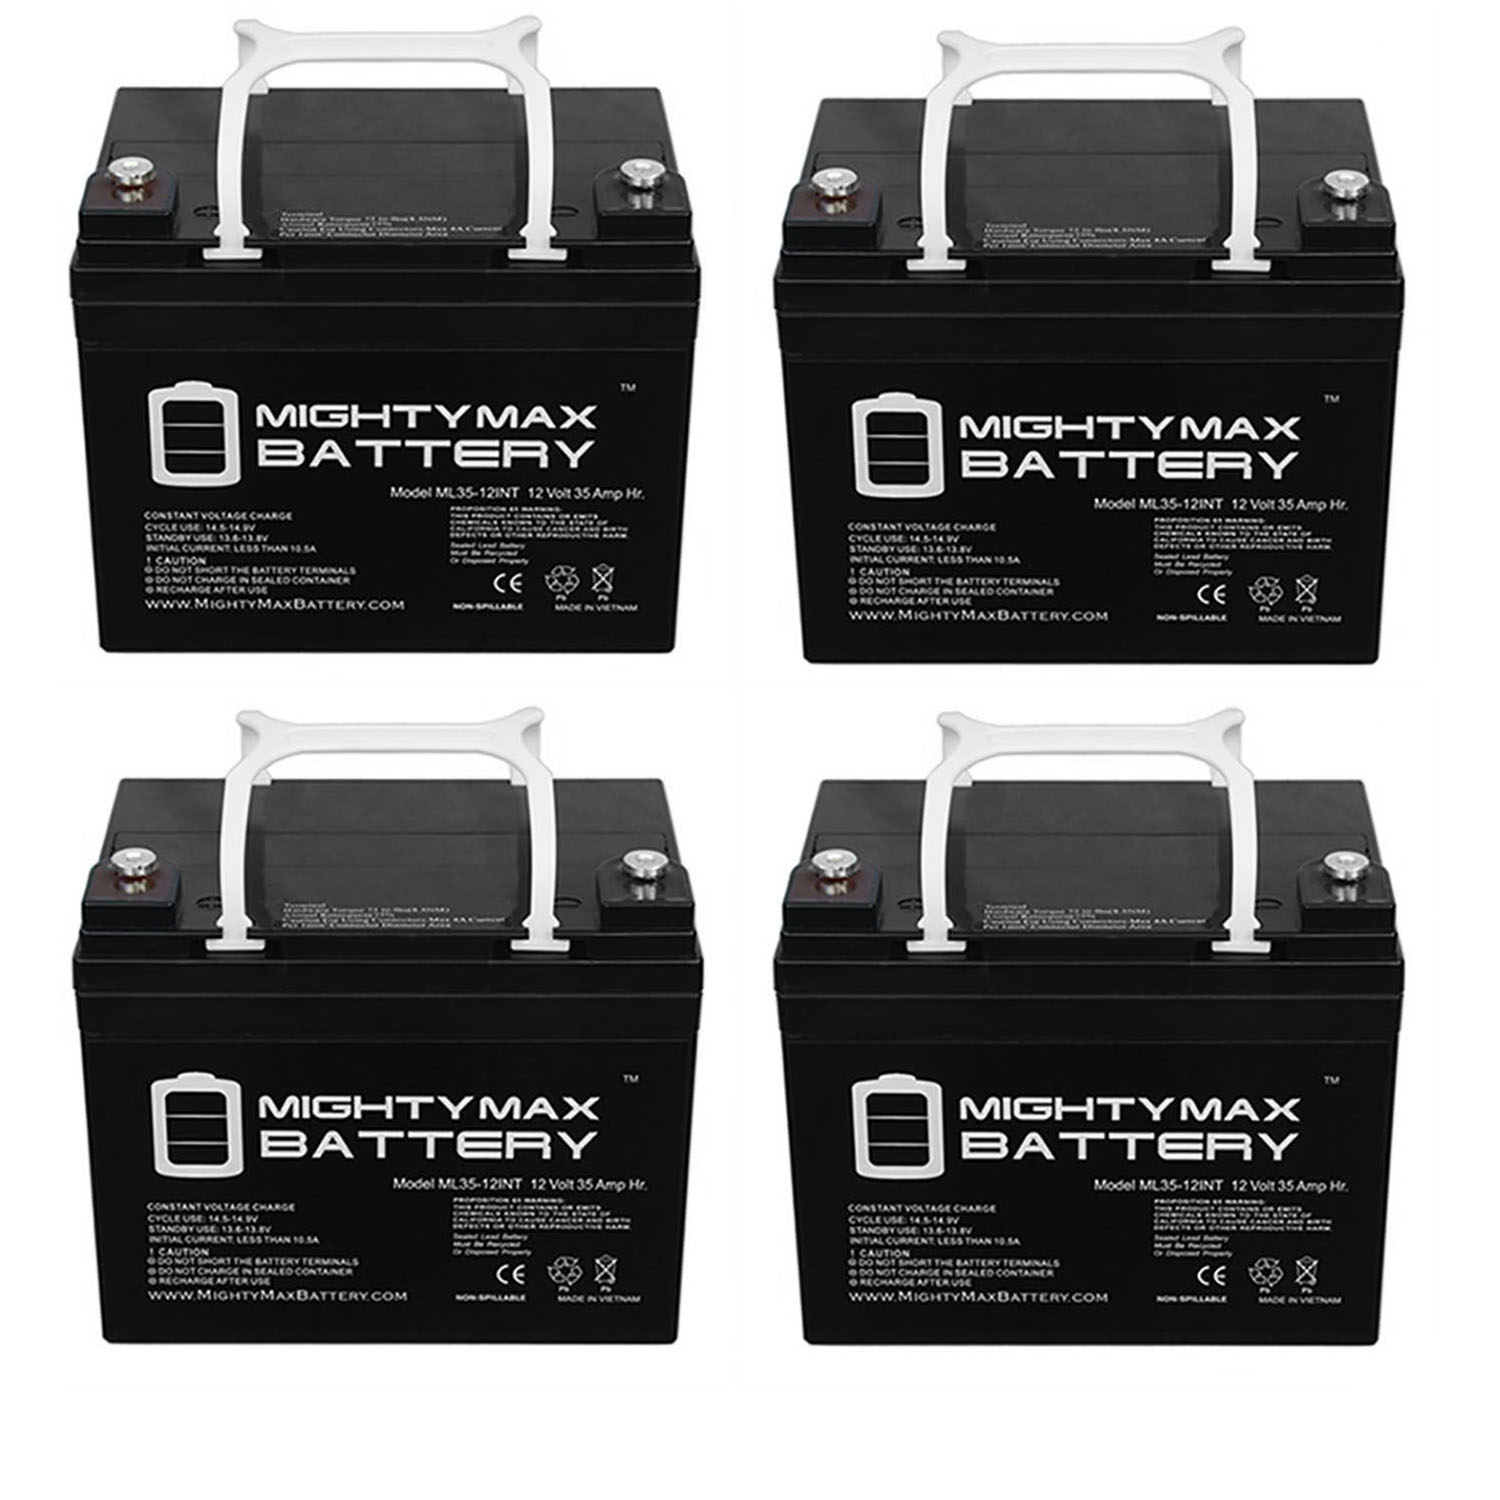 12V 35AH INT Replacement Battery for Ihc Cub Garden 108 - 4 Pack